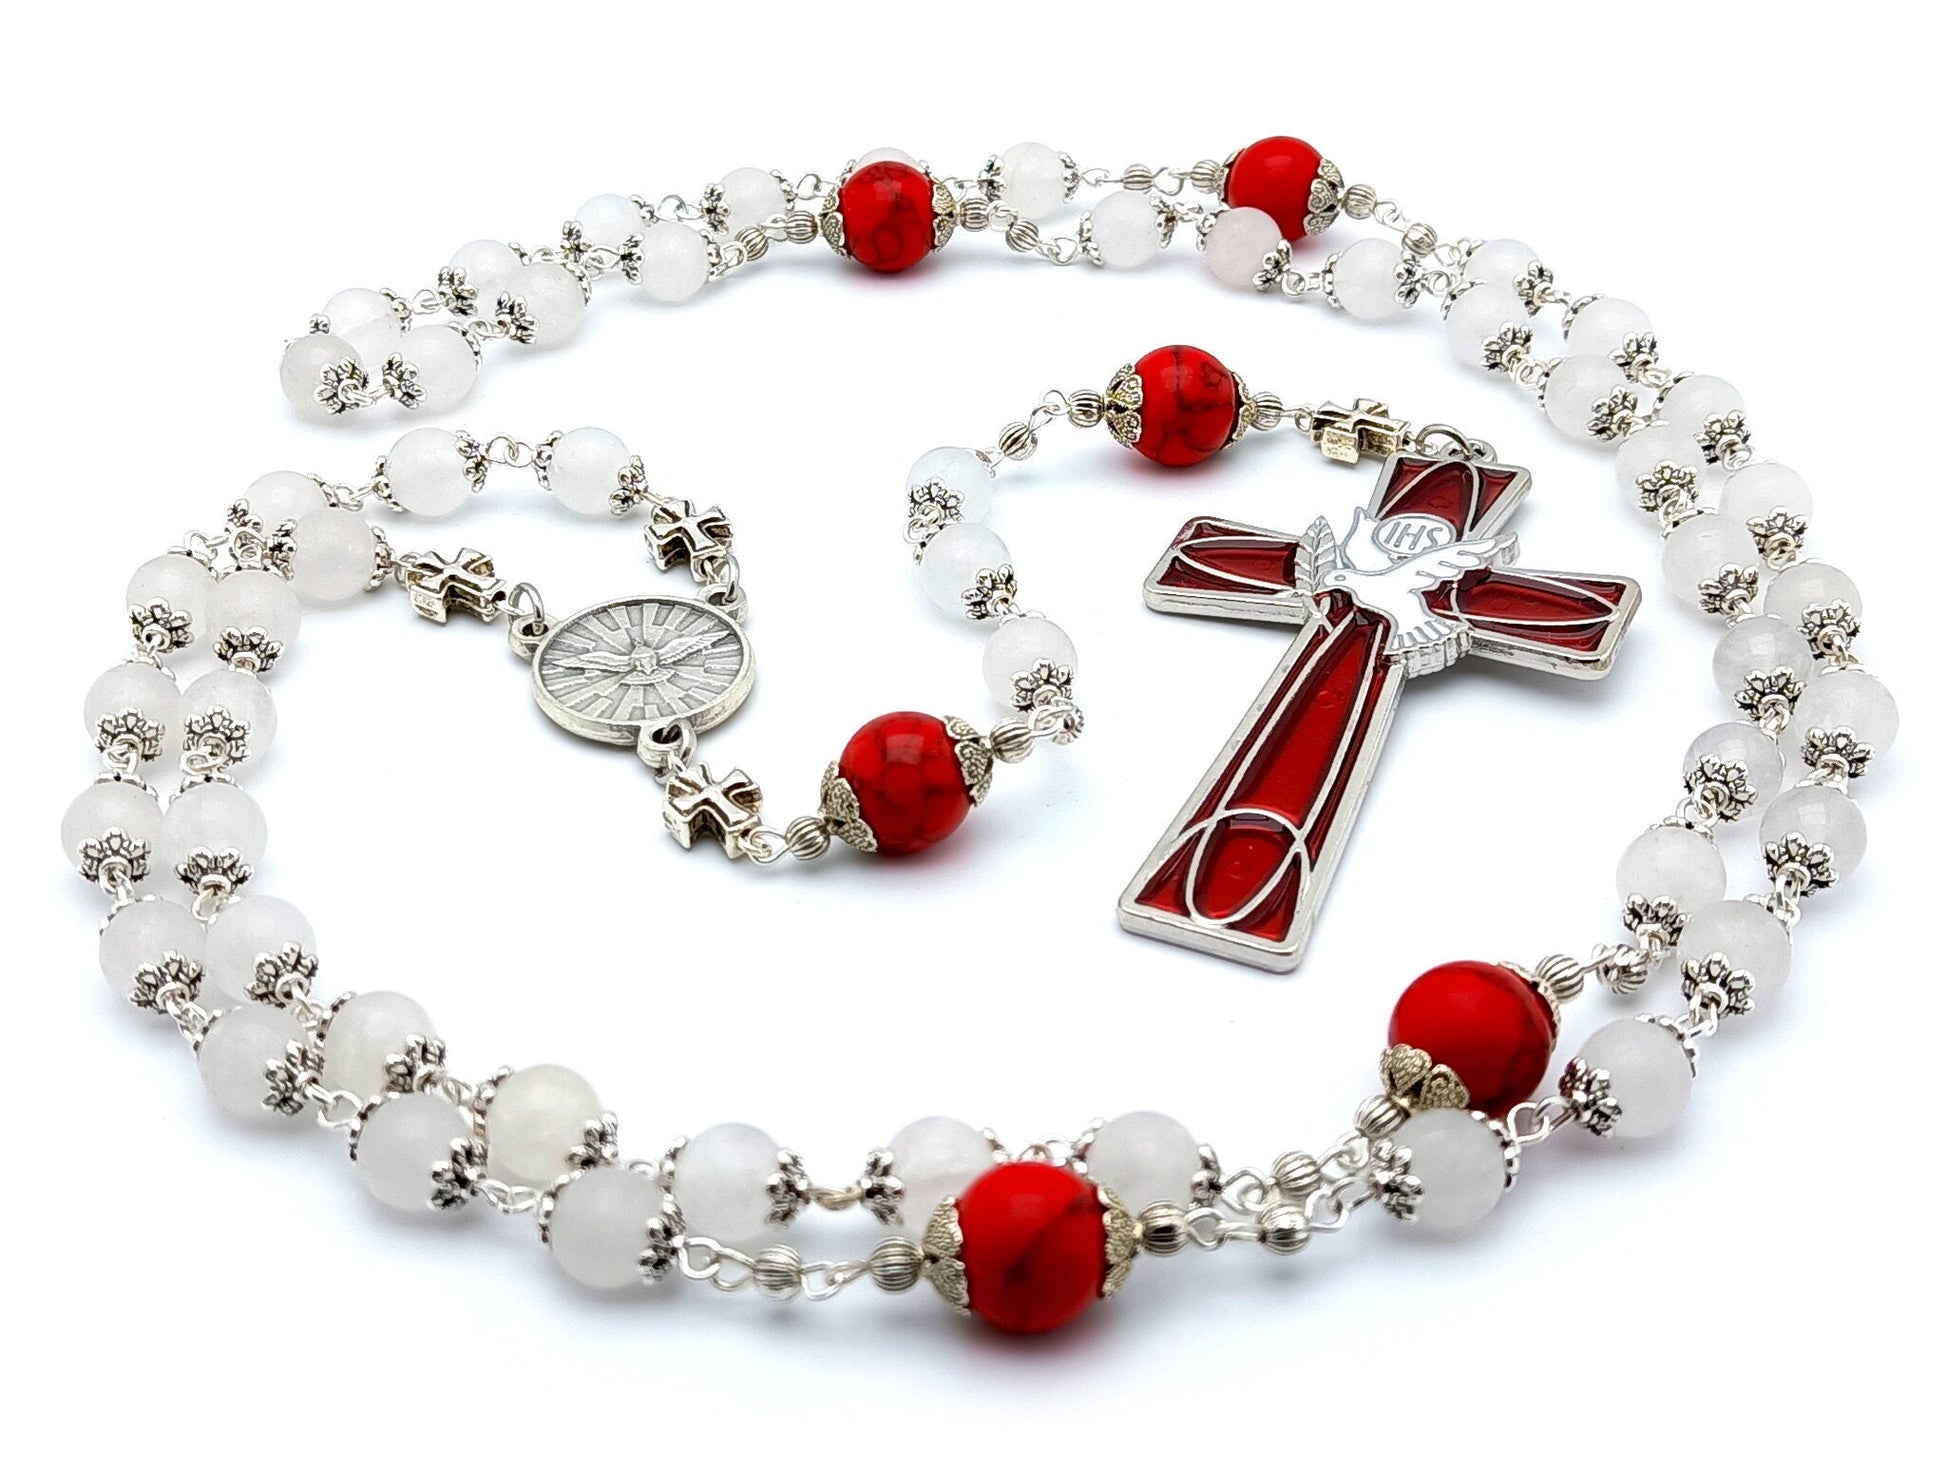 Holy Spirit unique rosary beads with red and white gemstone beads, red and white enamel cross and Holy Spirit silver centre medal.